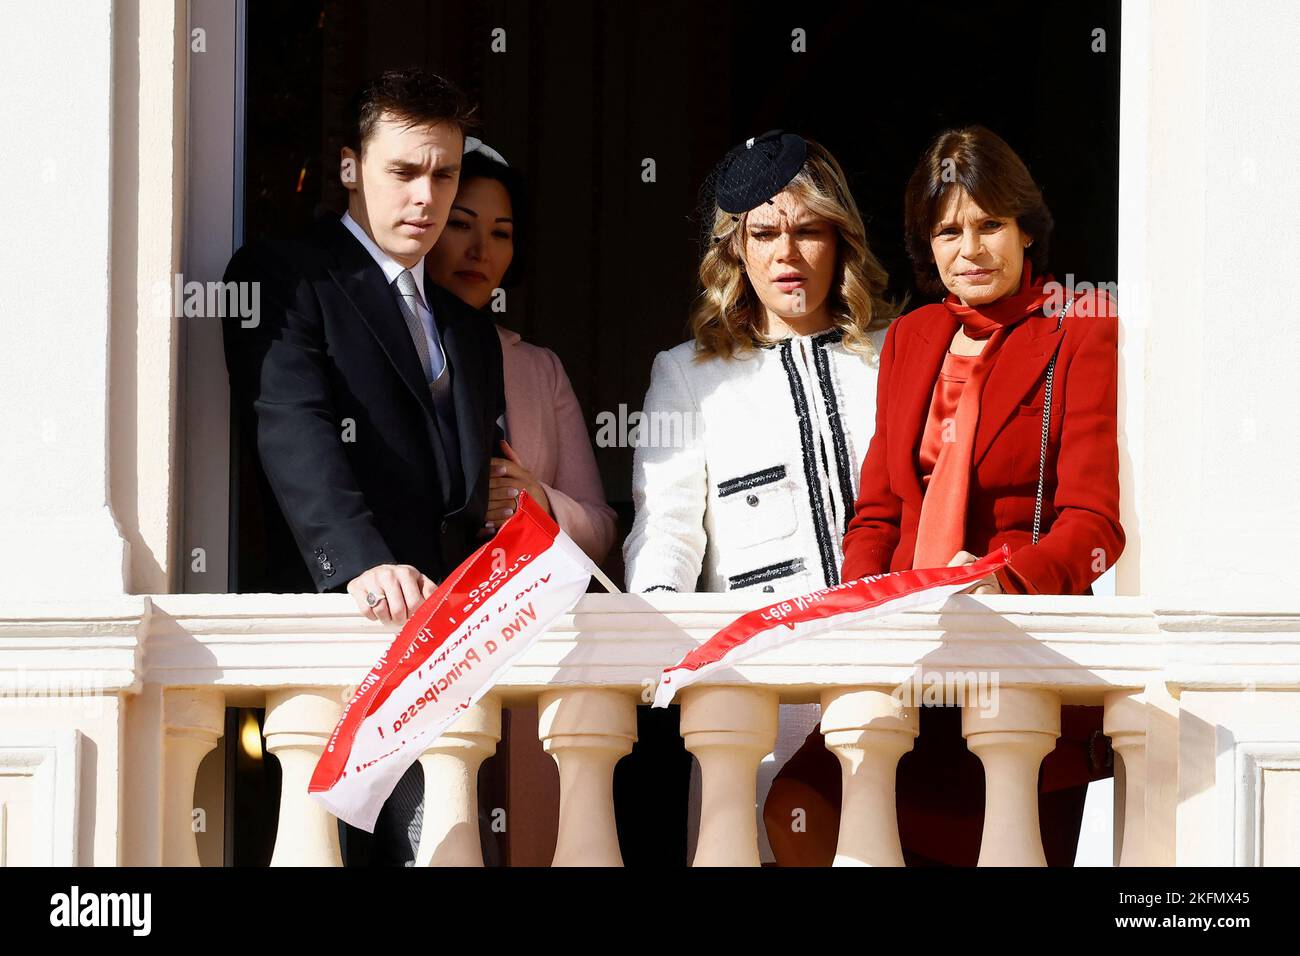 Princess Stephanie of Monaco, Louis Ducruet and his wife Marie Chevallier and Camille Gottlieb stand on the Palace balcony during the celebrations marking Monaco's National Day in Monaco, November 19, 2022. REUTERS/Eric Gaillard Stock Photo